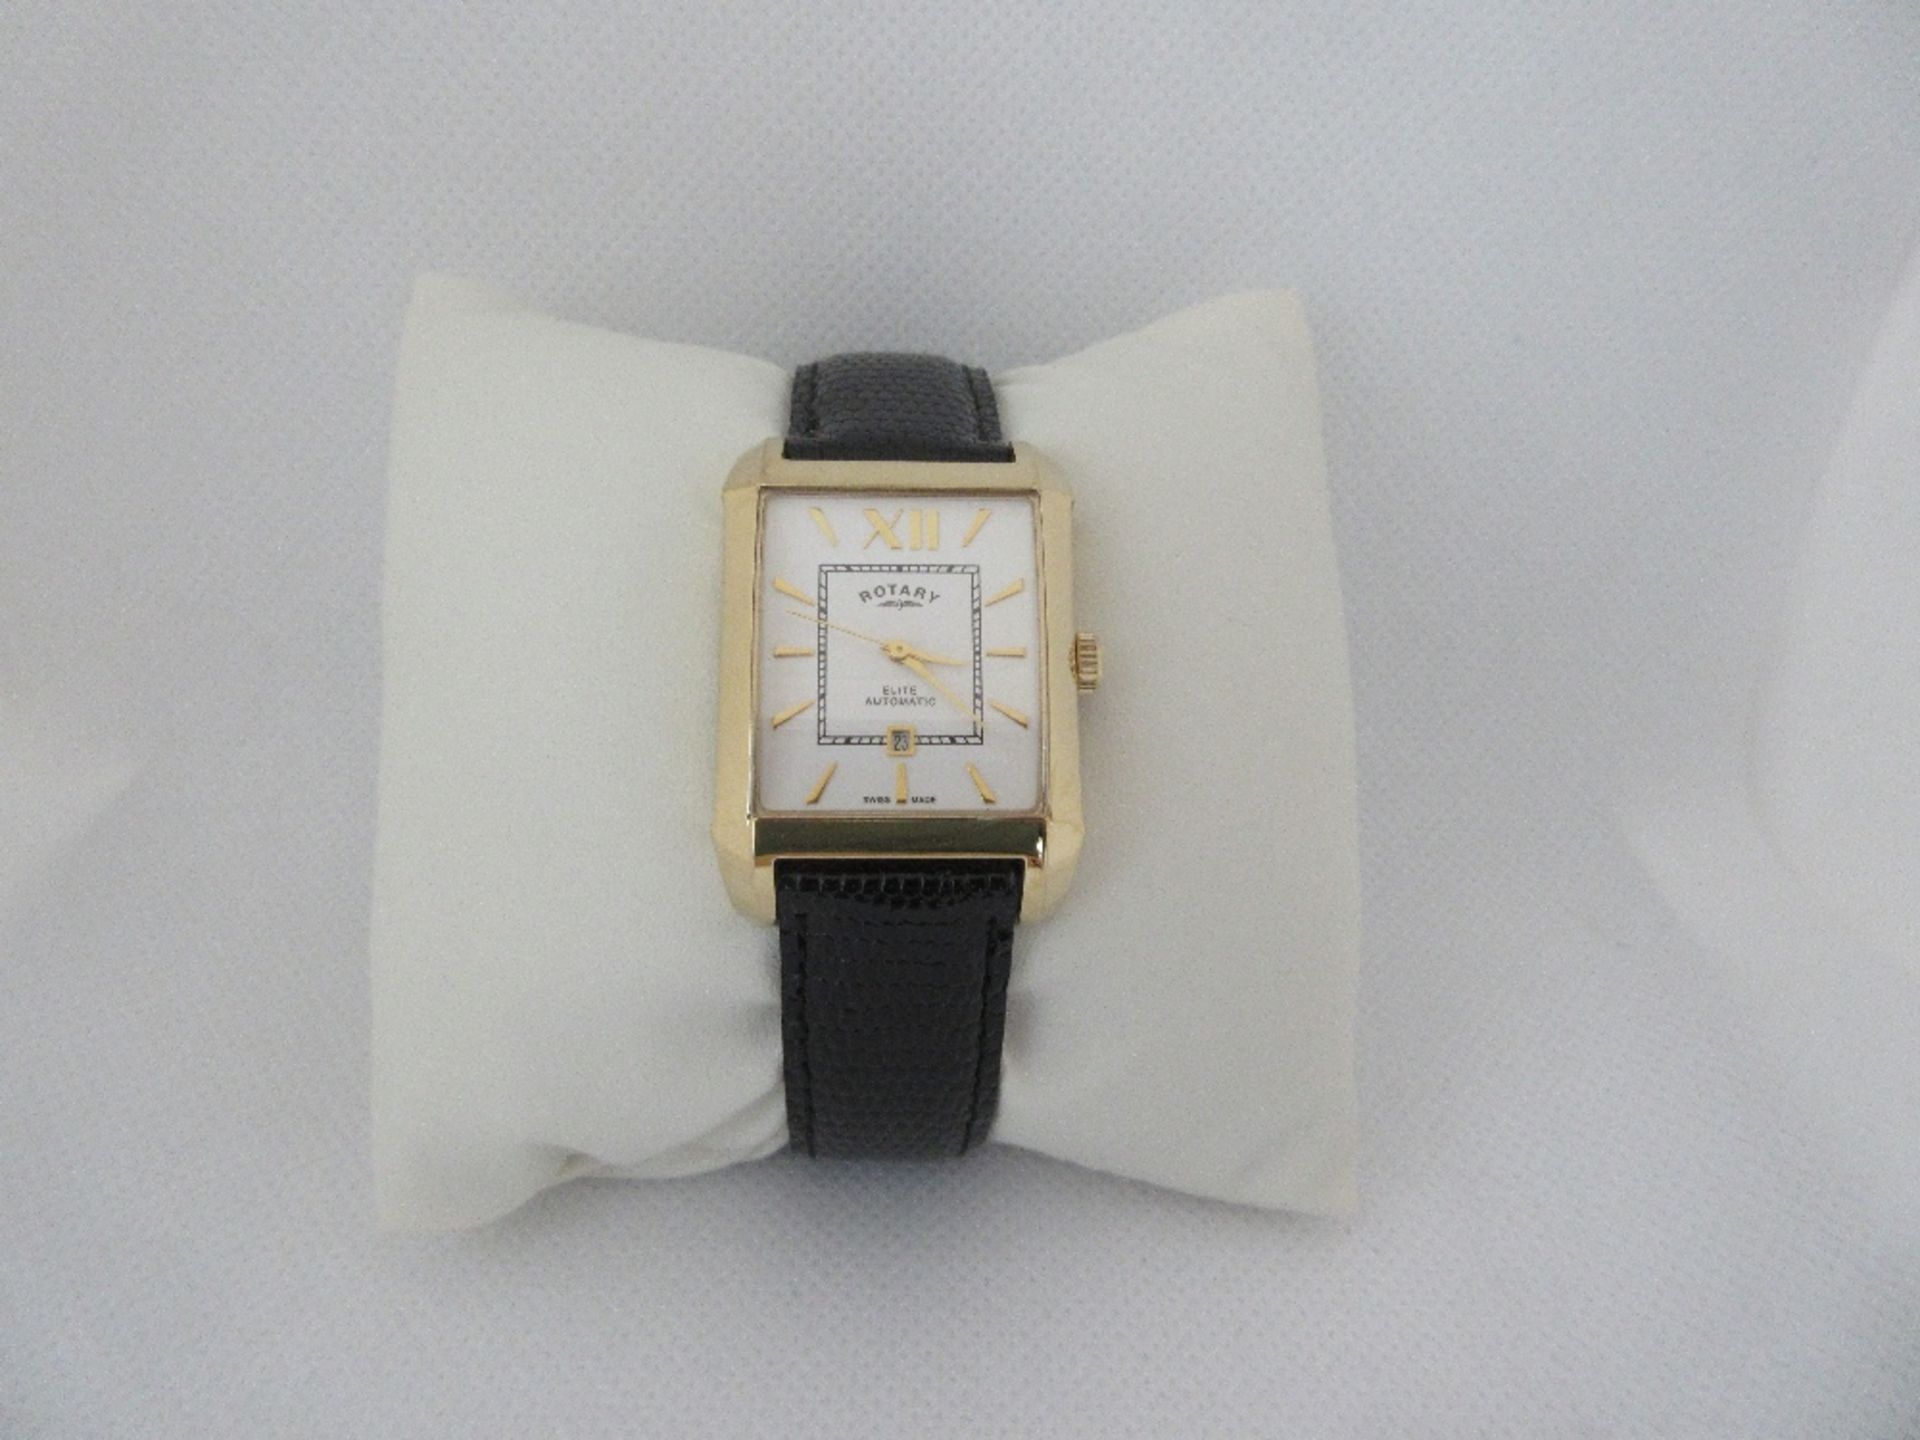 ROTARY MALE WATCH, MODEL GS02283/01S, CASE DIAMETER 28MM, LEATHER STRAP, BOXED - Image 2 of 4